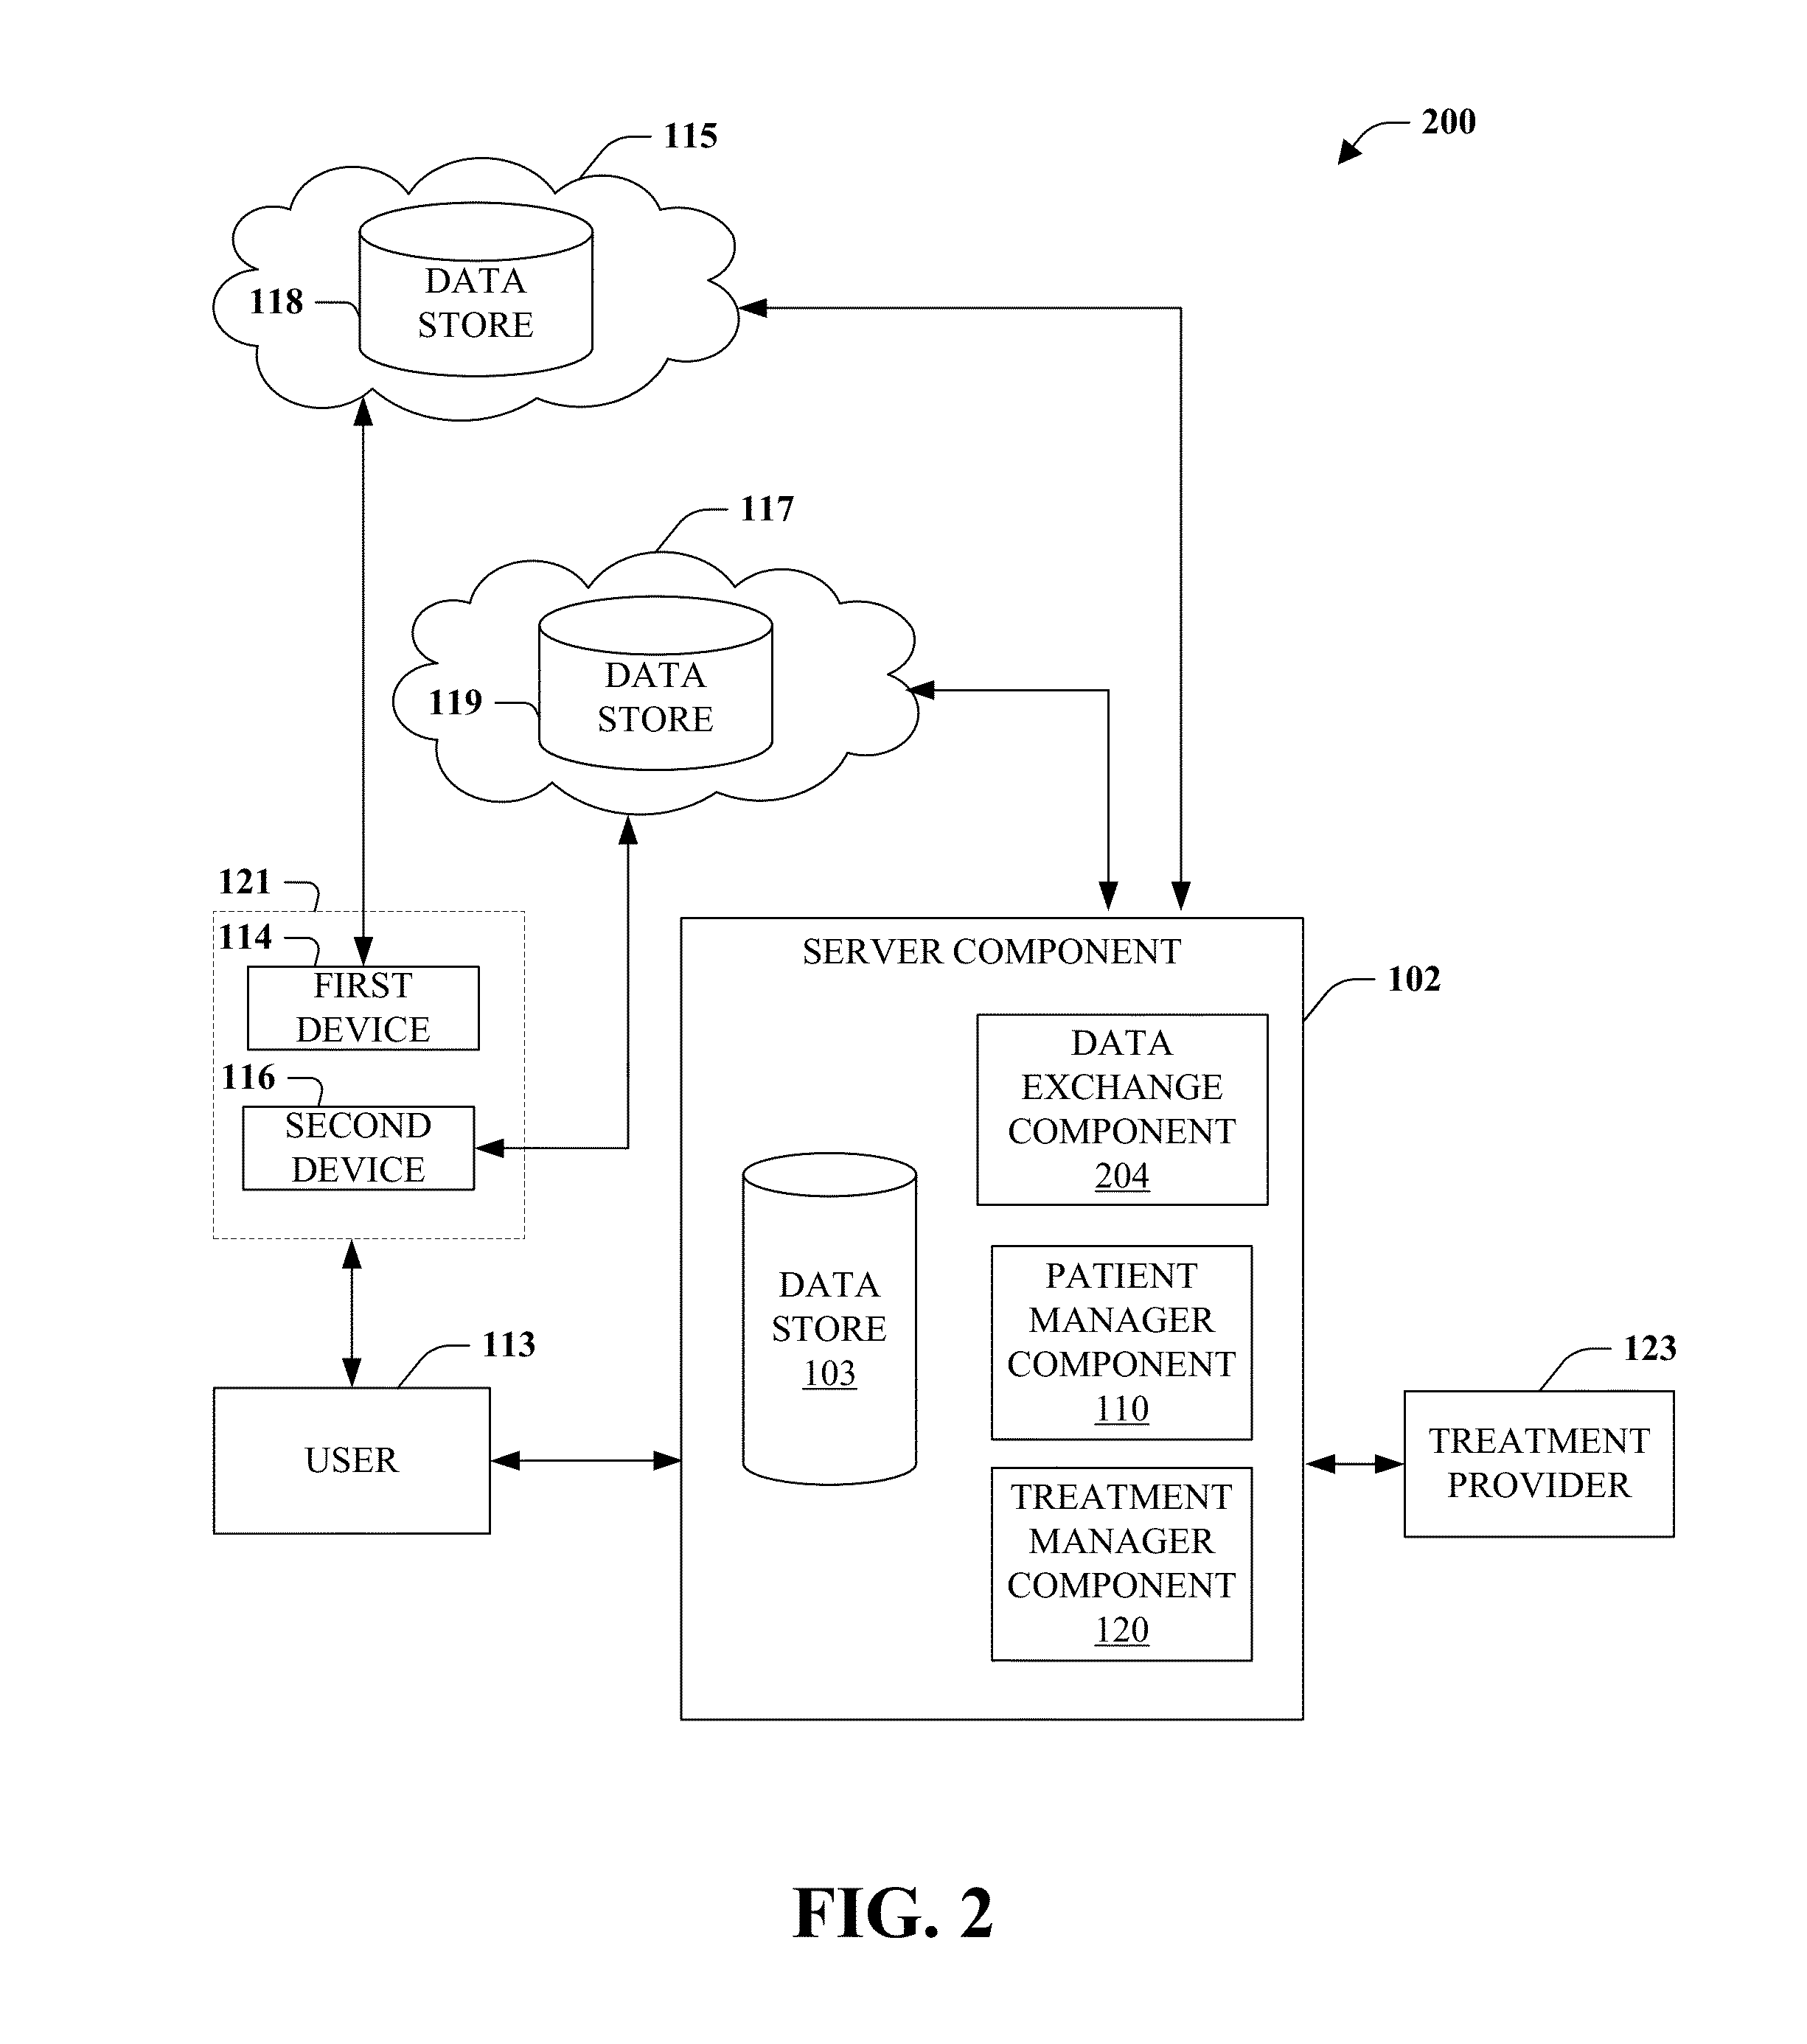 Method and System for Delivering Healthcare Via Personalized Parameter Tracking Kits